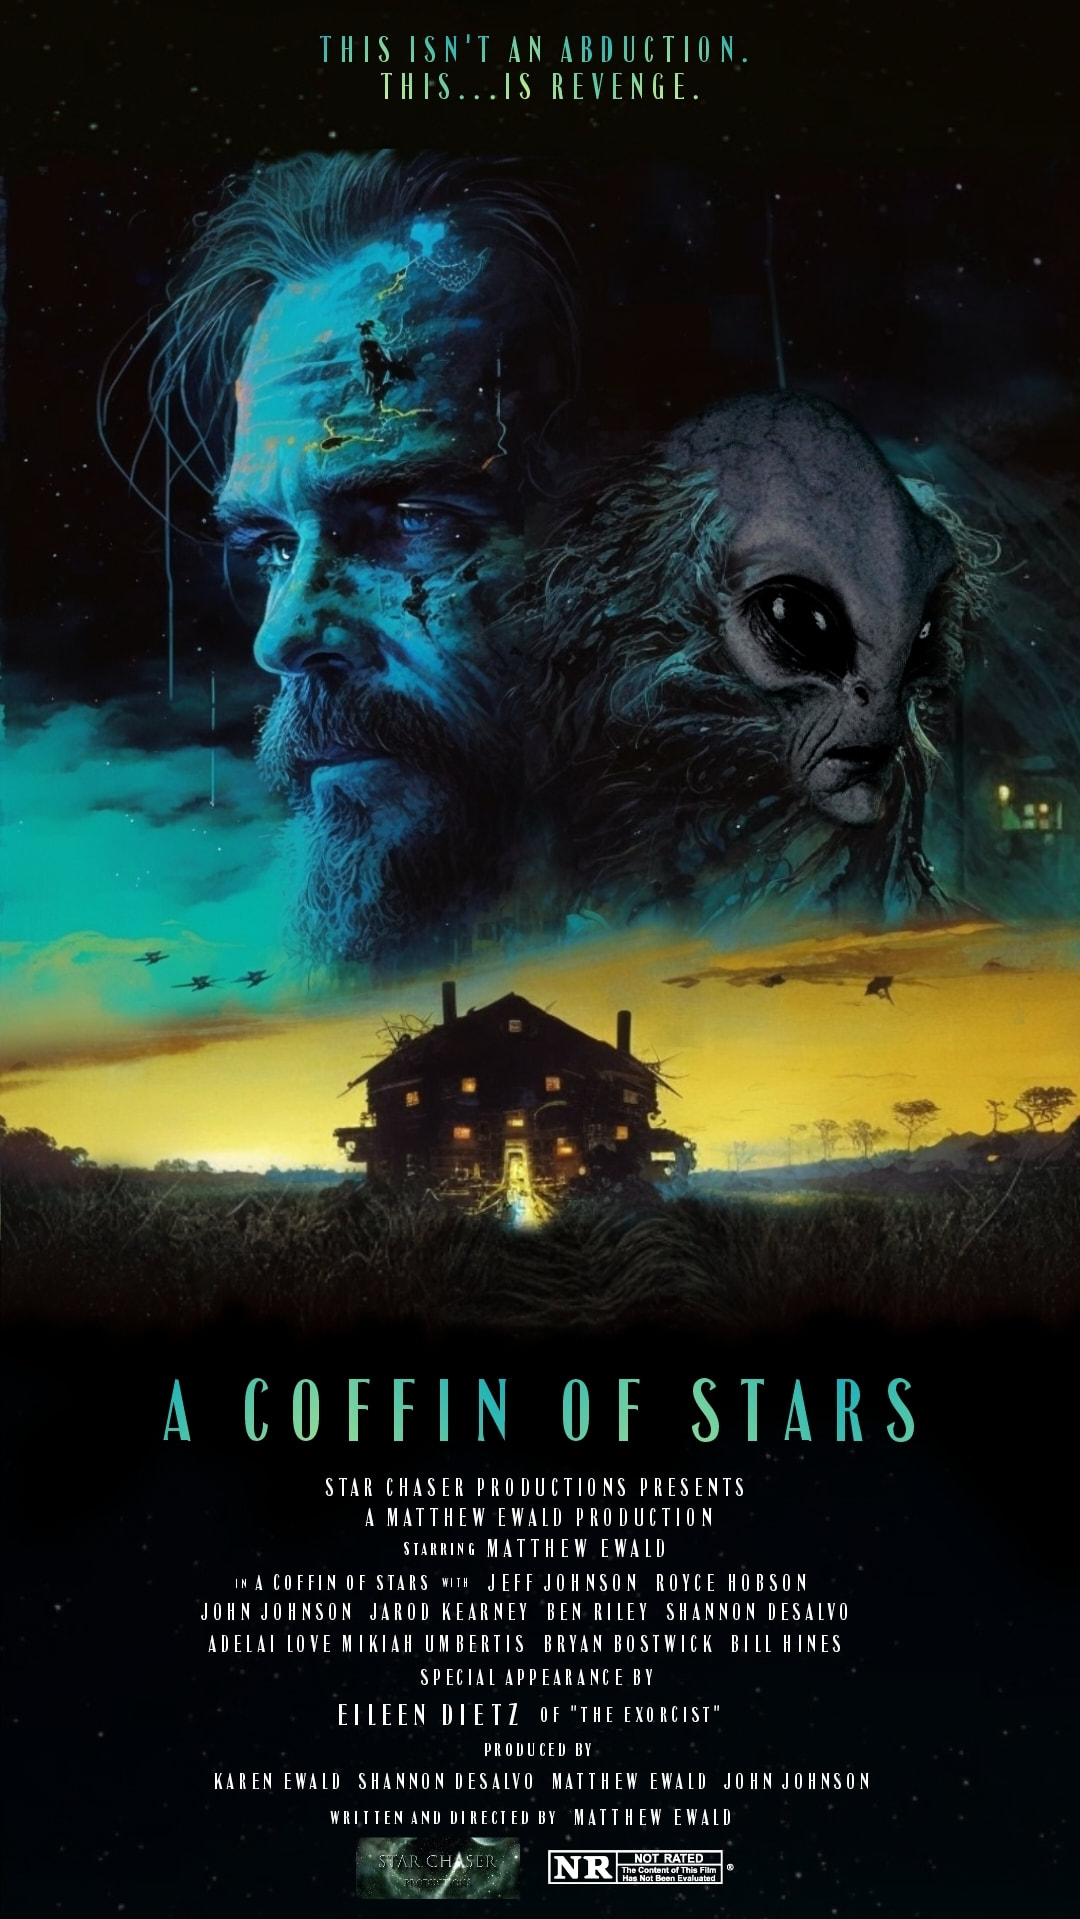 A Coffin of Stars poster.